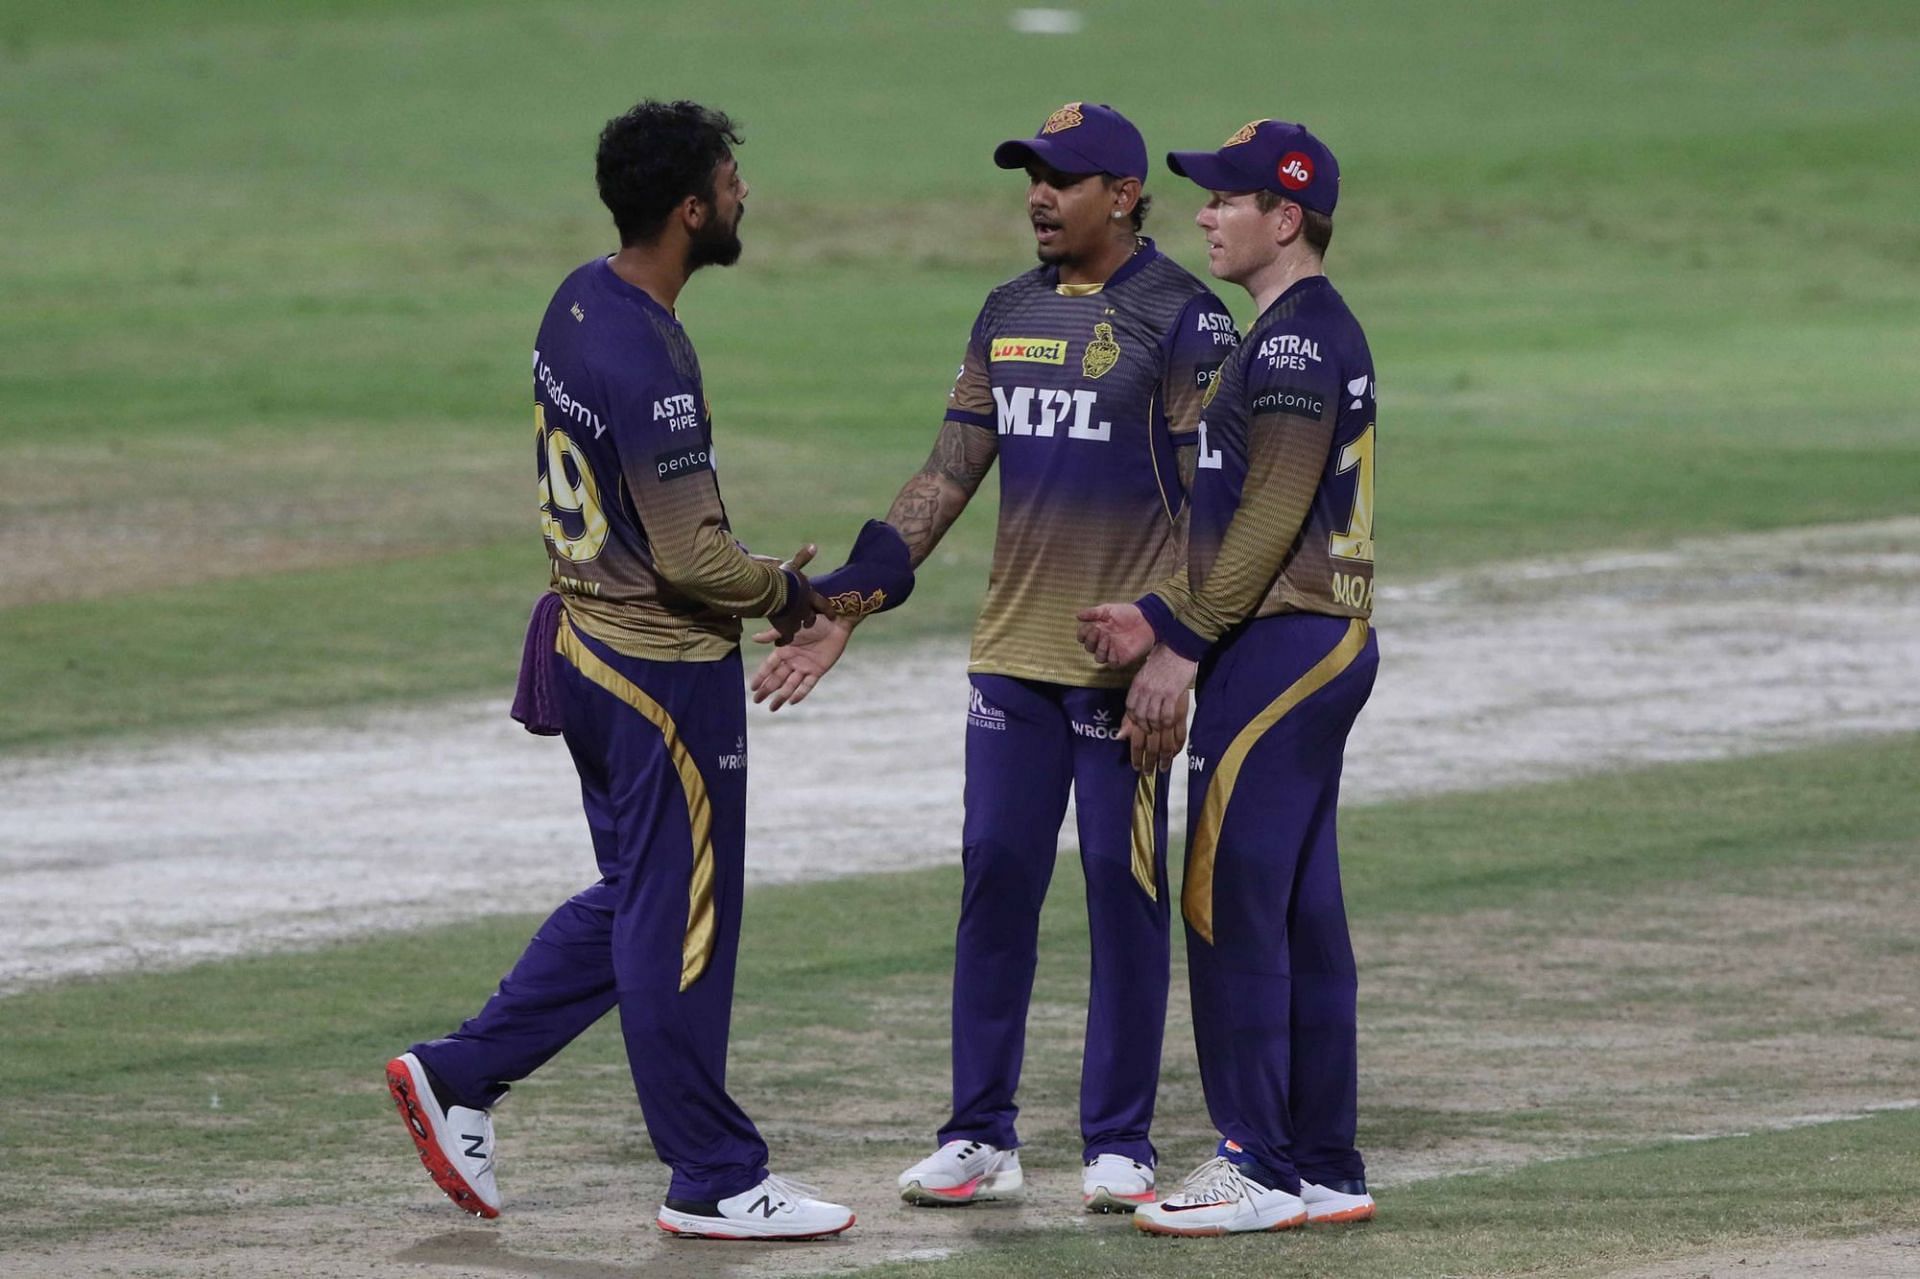 Sunil Narine (center) was a game-changer for the Kolkata Knight Riders in IPL 2021 (image Courtesy: IPLT20.com)